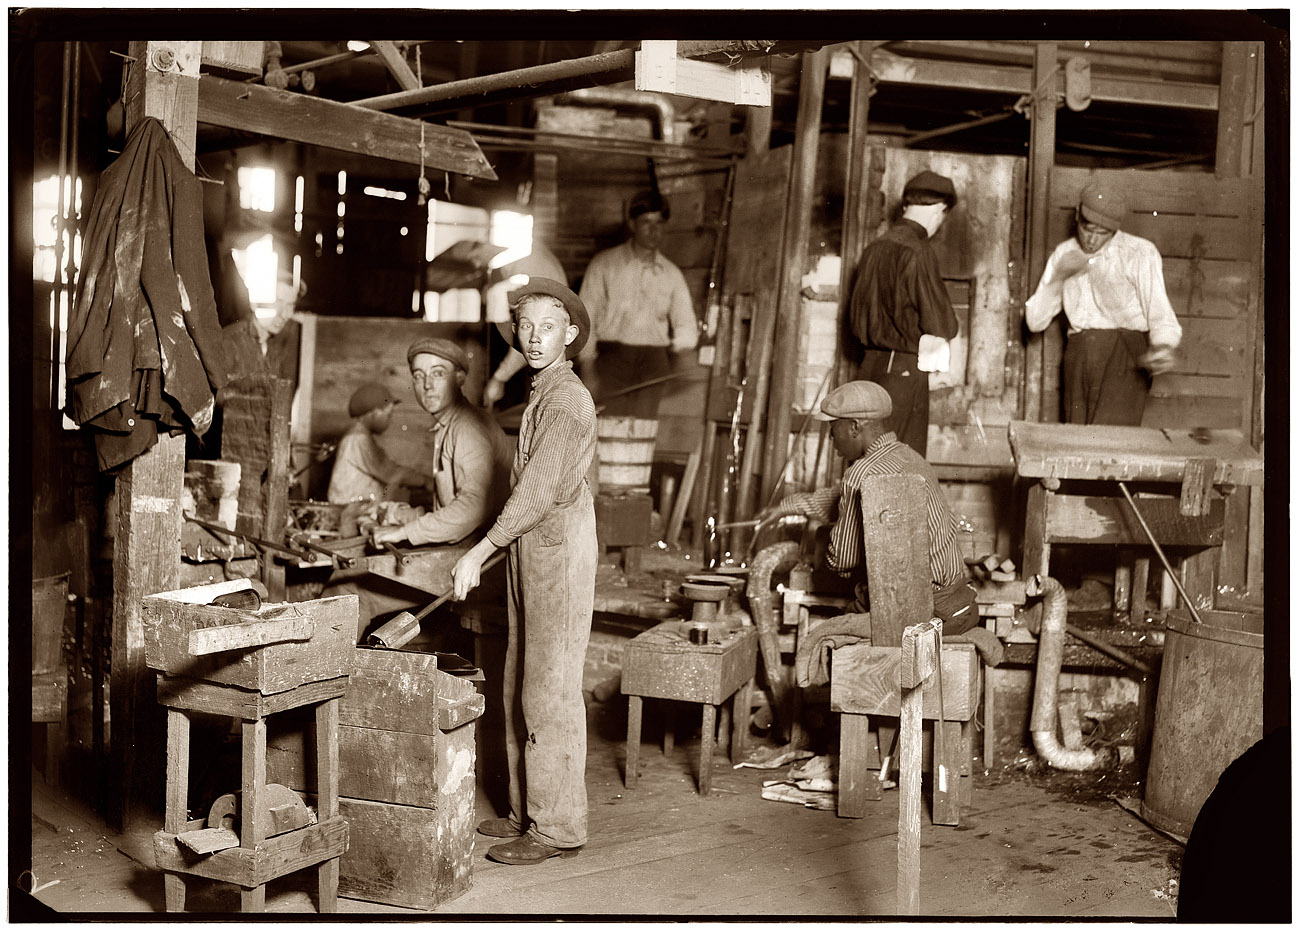 November 1909. Cumberland Glass Works at Bridgeton, New Jersey. A young "holding-mold boy" is seen, dimly, to the left [little kid toward the back]. Negroes, Greeks and Italians are being employed in many glass houses. View full size. Photograph and caption by child-labor reformer Lewis Wickes Hine.